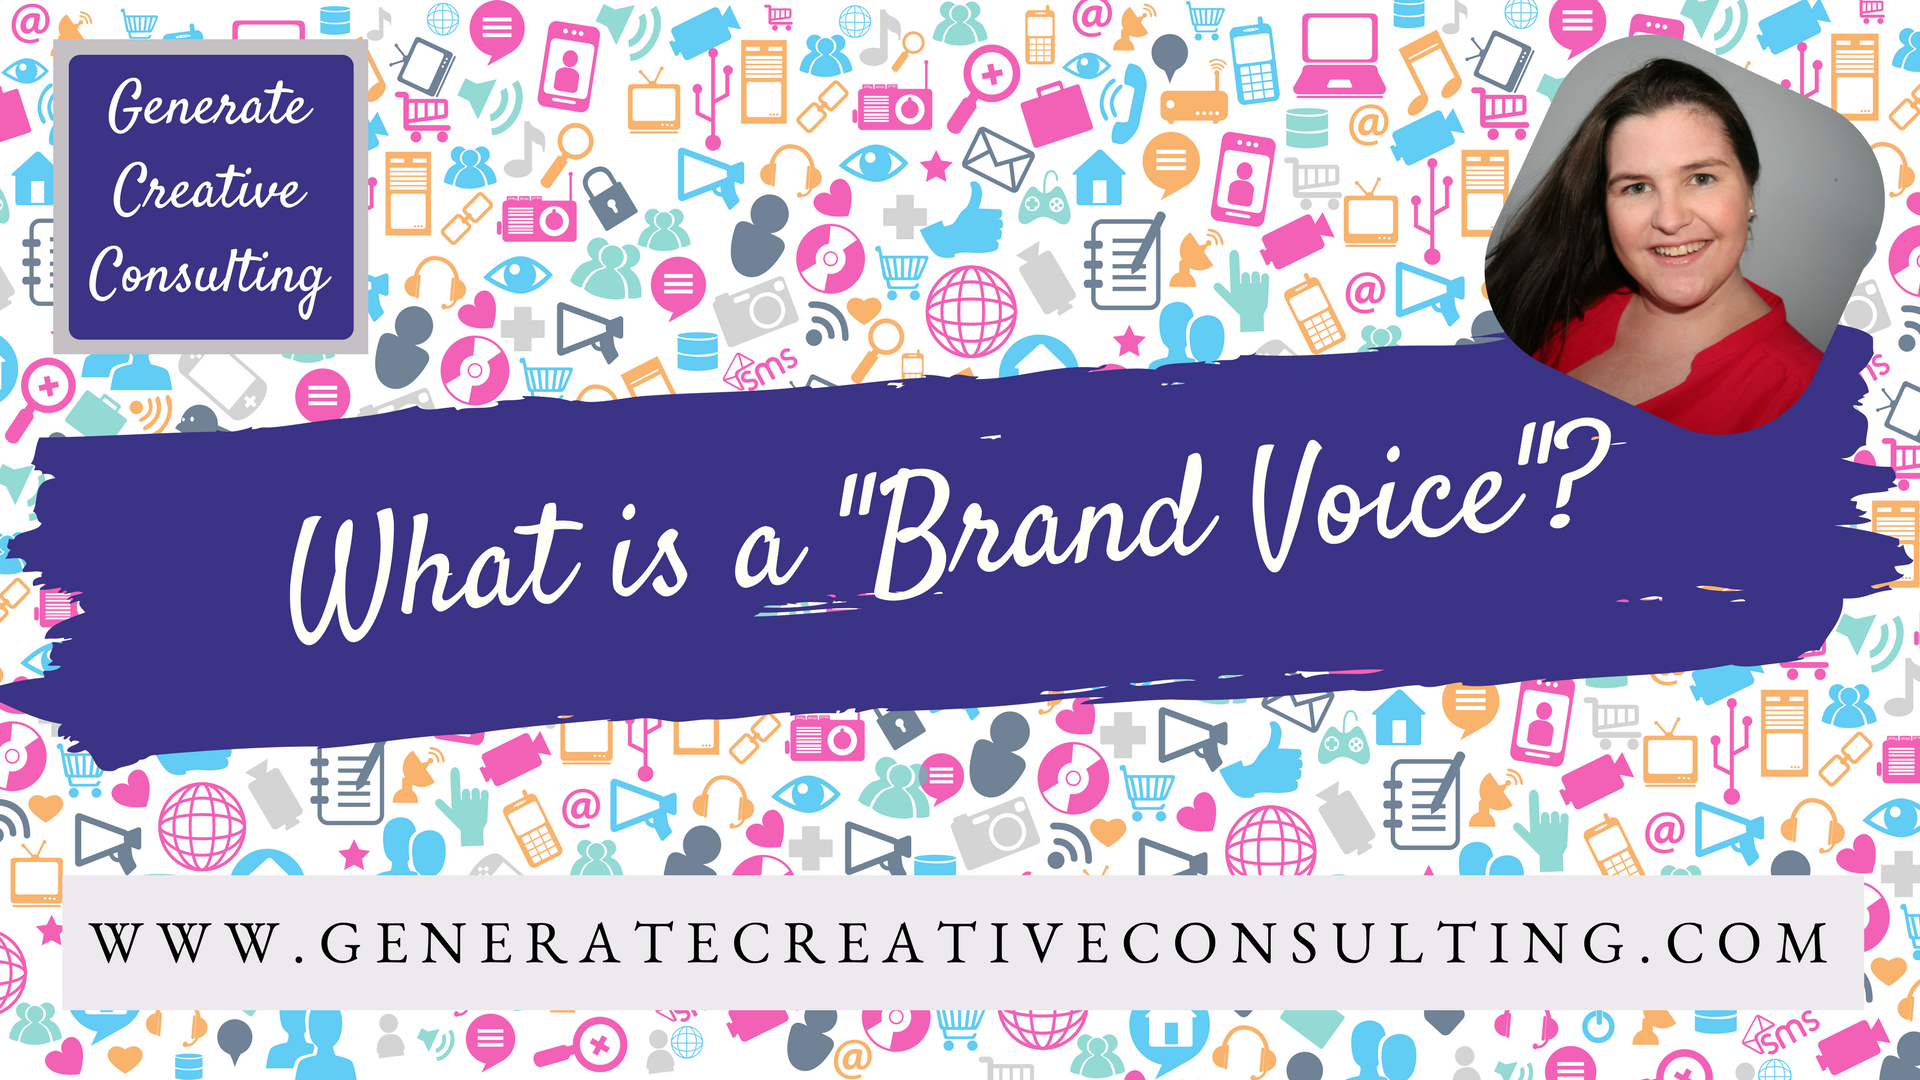 What is Your Brand Voice?